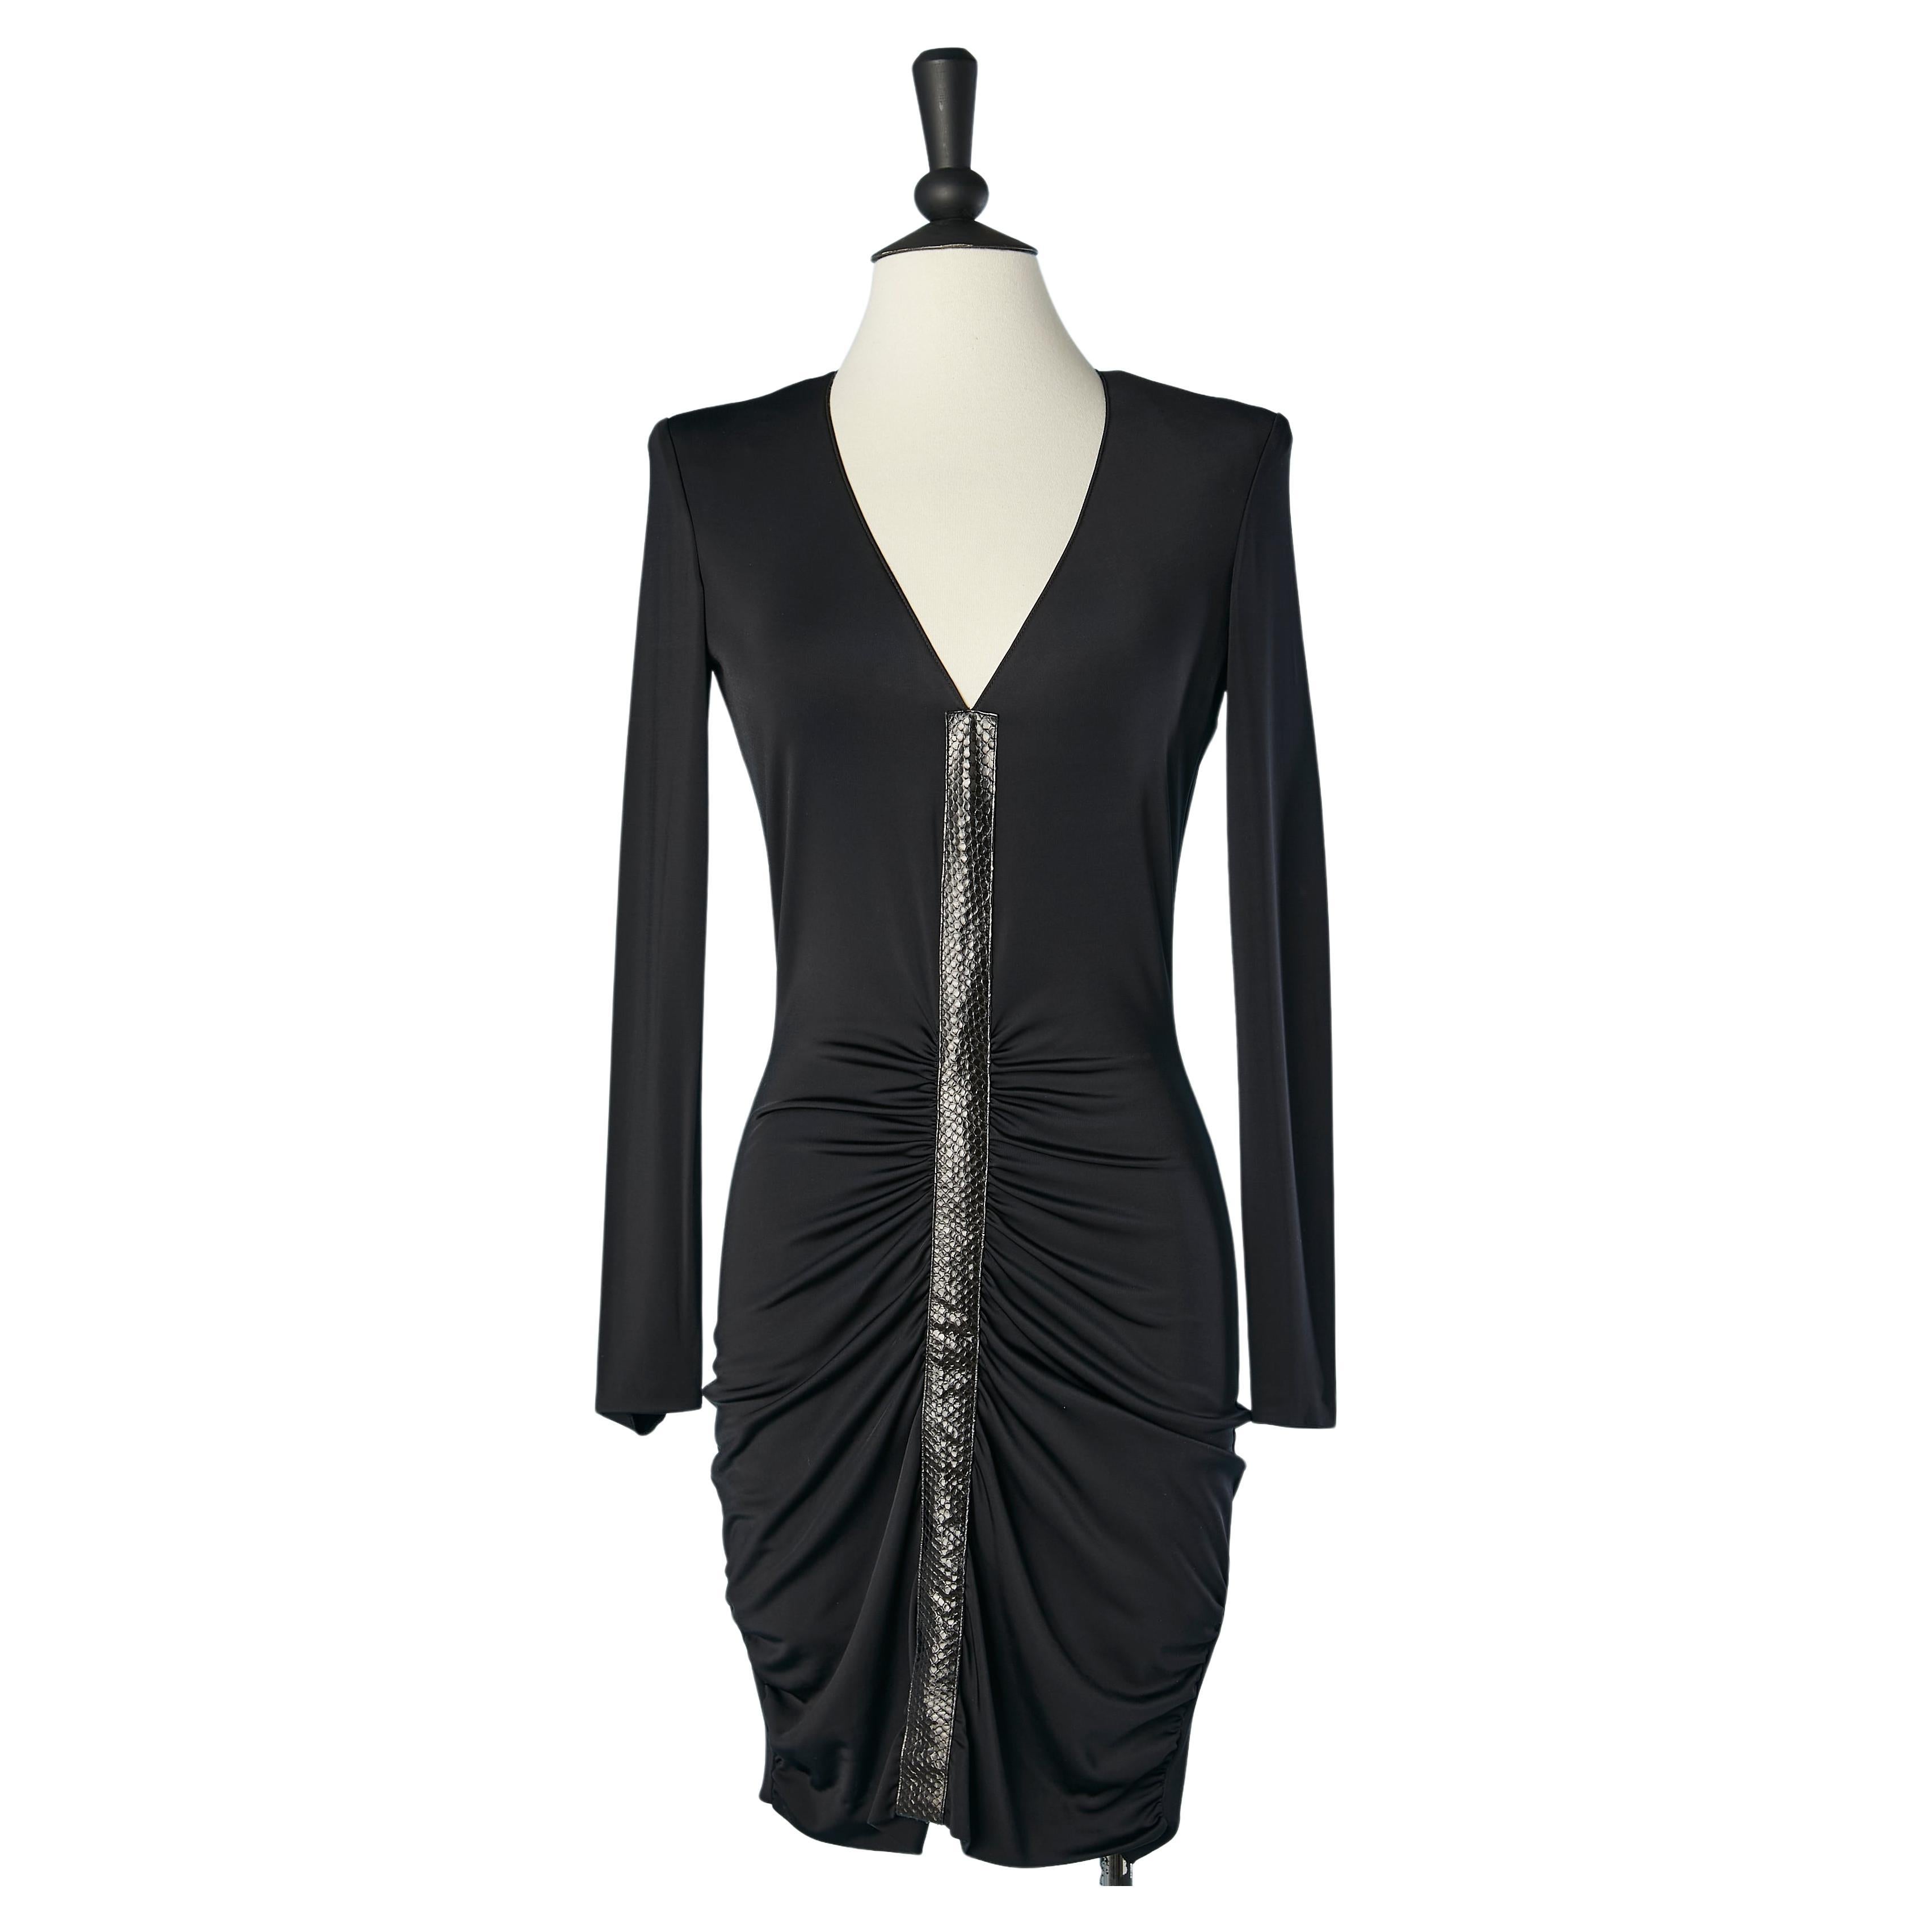 Black draped cocktail dress with leather details middle front Azzaro Paris  For Sale